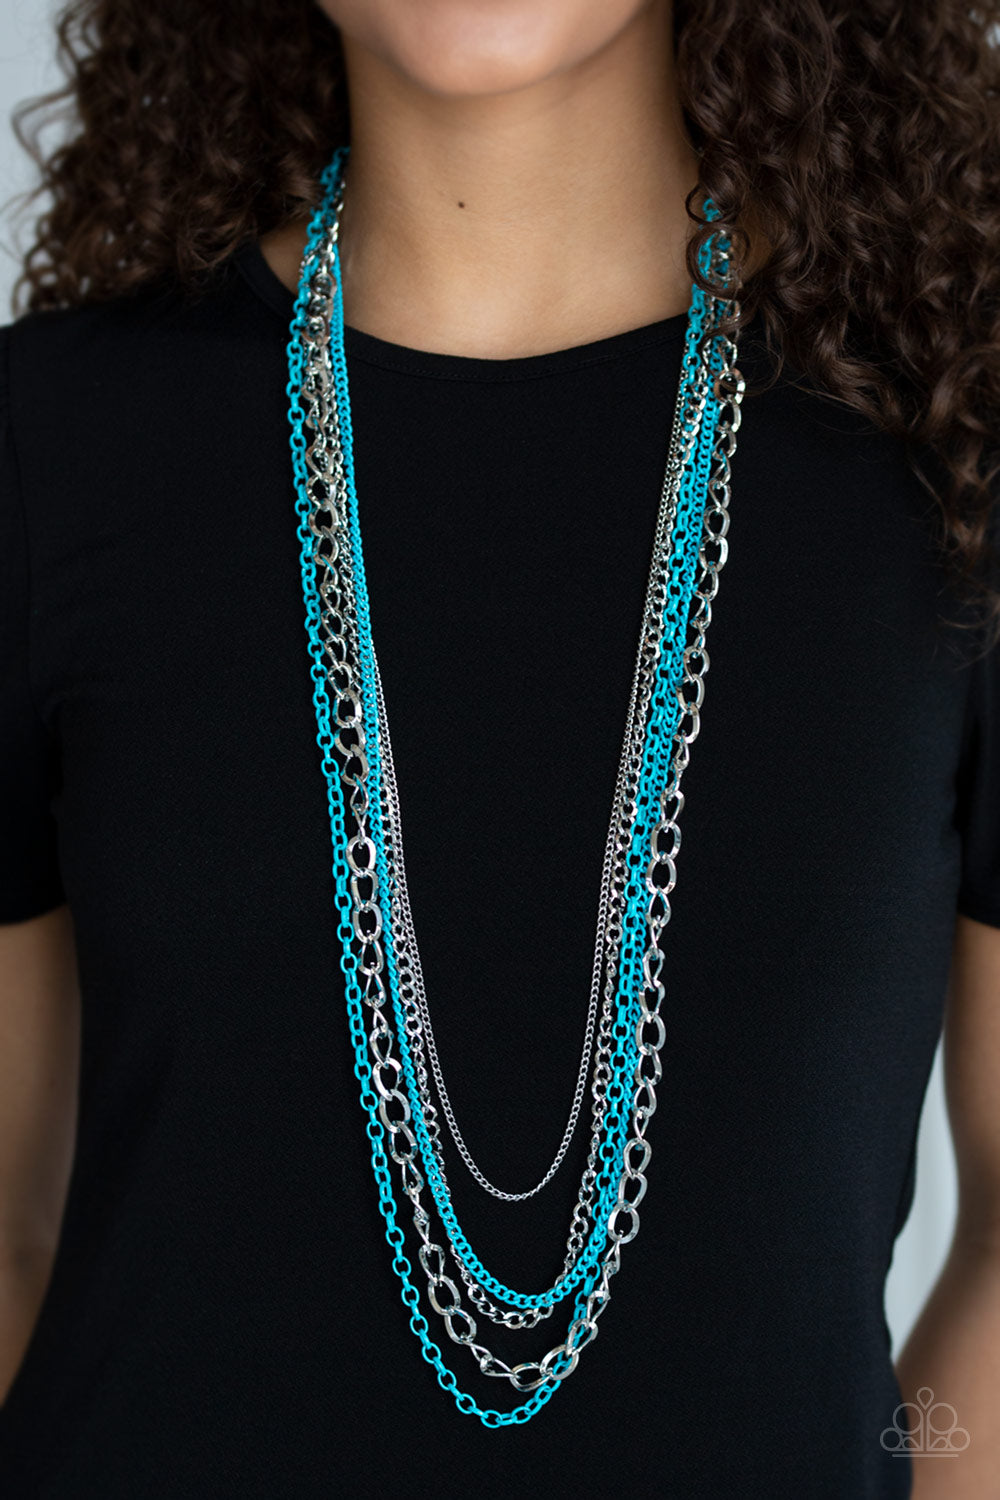 Industrial Vibrance - Blue necklace